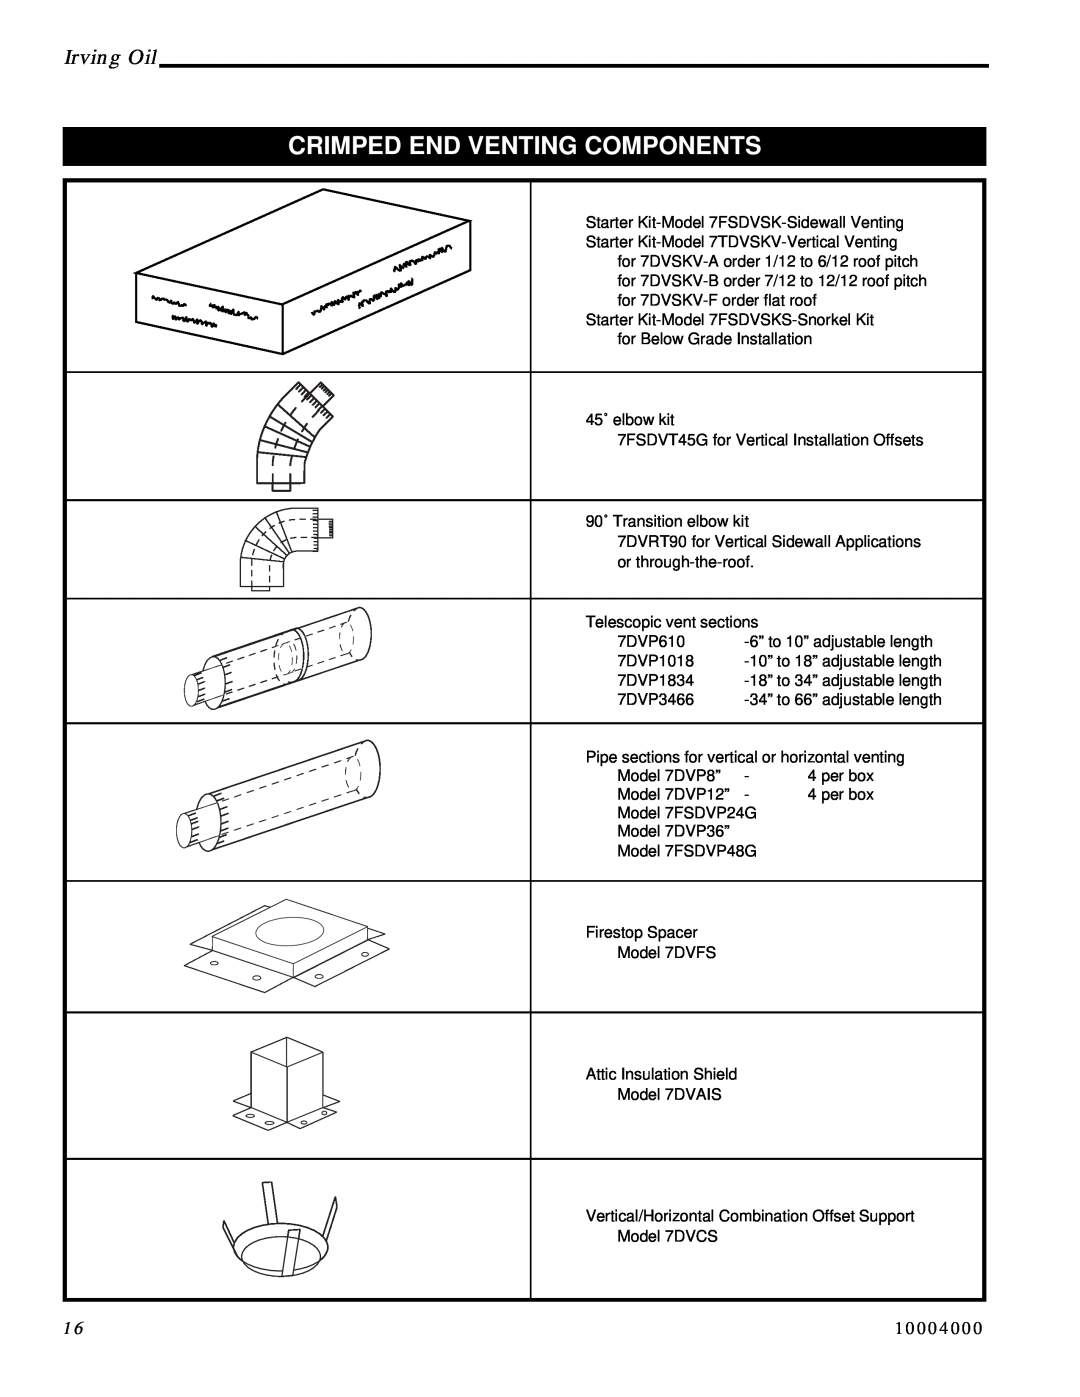 Vermont Casting IRFSDV34, IRFSDV24 installation instructions Crimped End Venting Components, Irving Oil, 10004000 